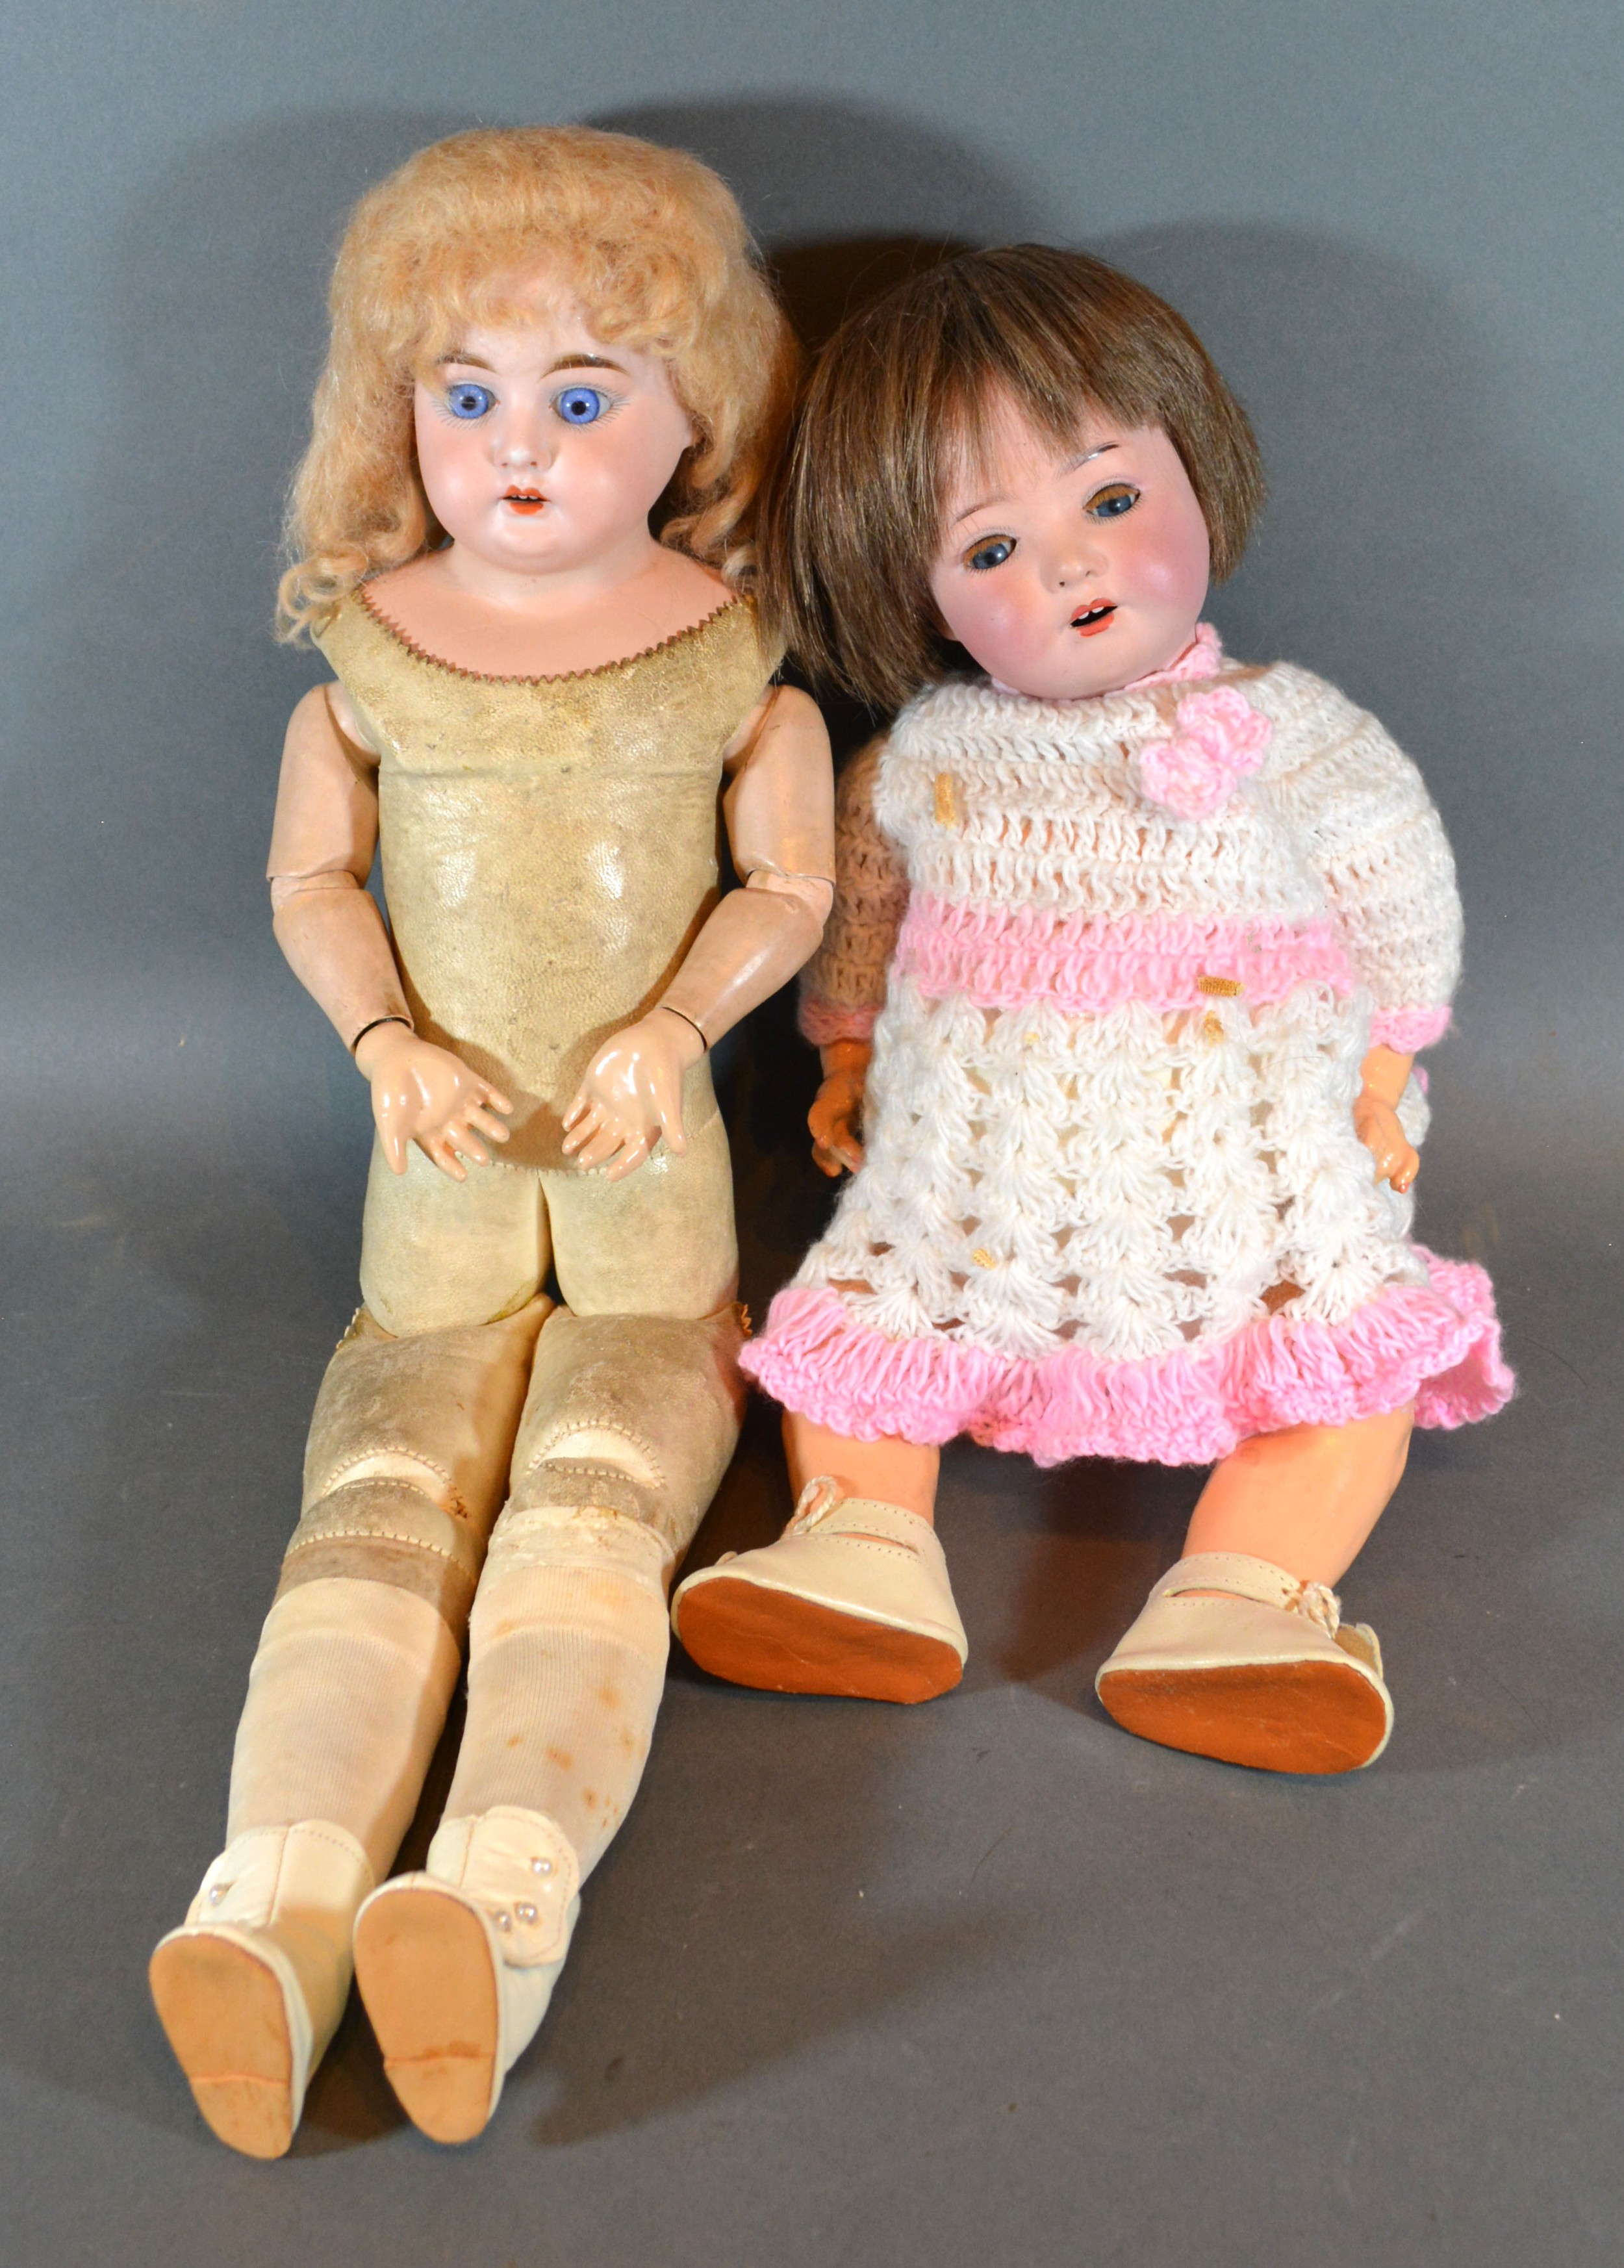 An Armand Marseille Bisque Head Doll No. 3200 with leather jointed body together with another bisque